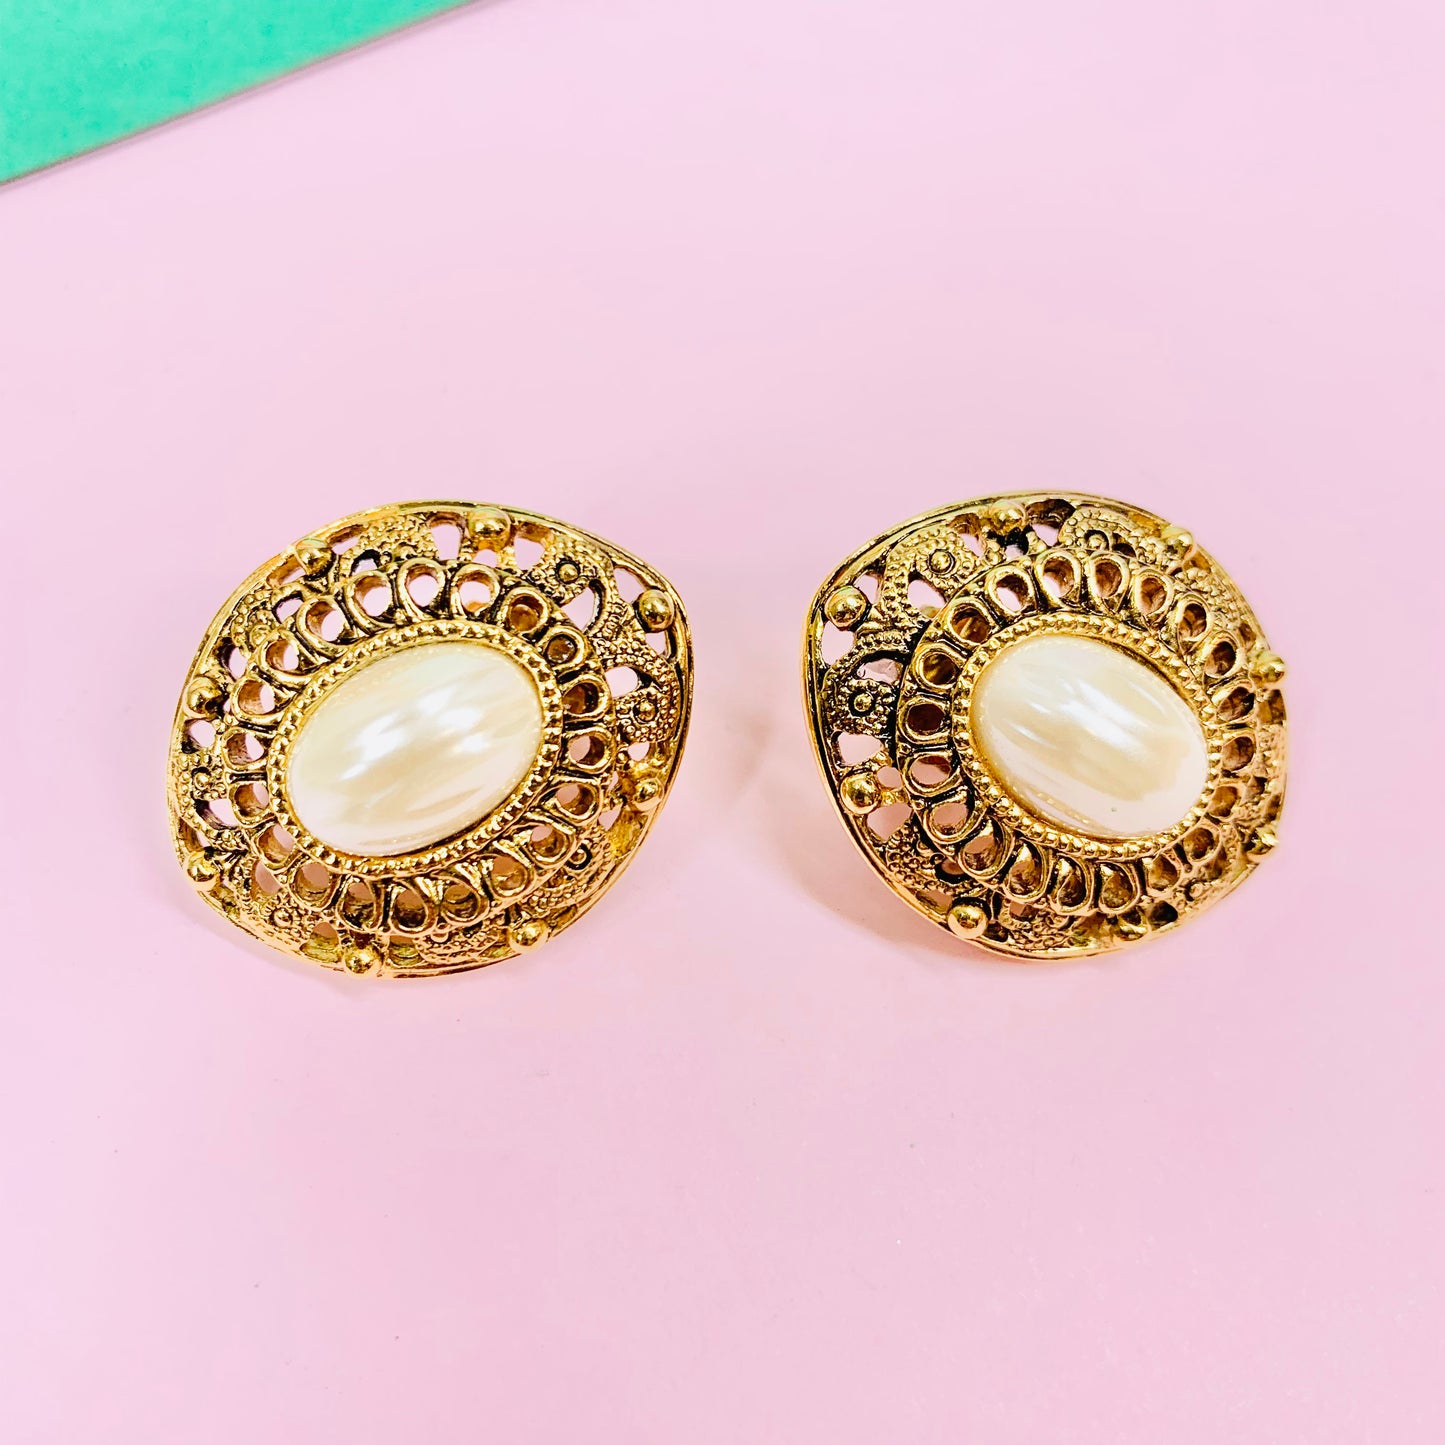 Rare stunning 1960s gold plated clip on pearl button earrings with filigree border